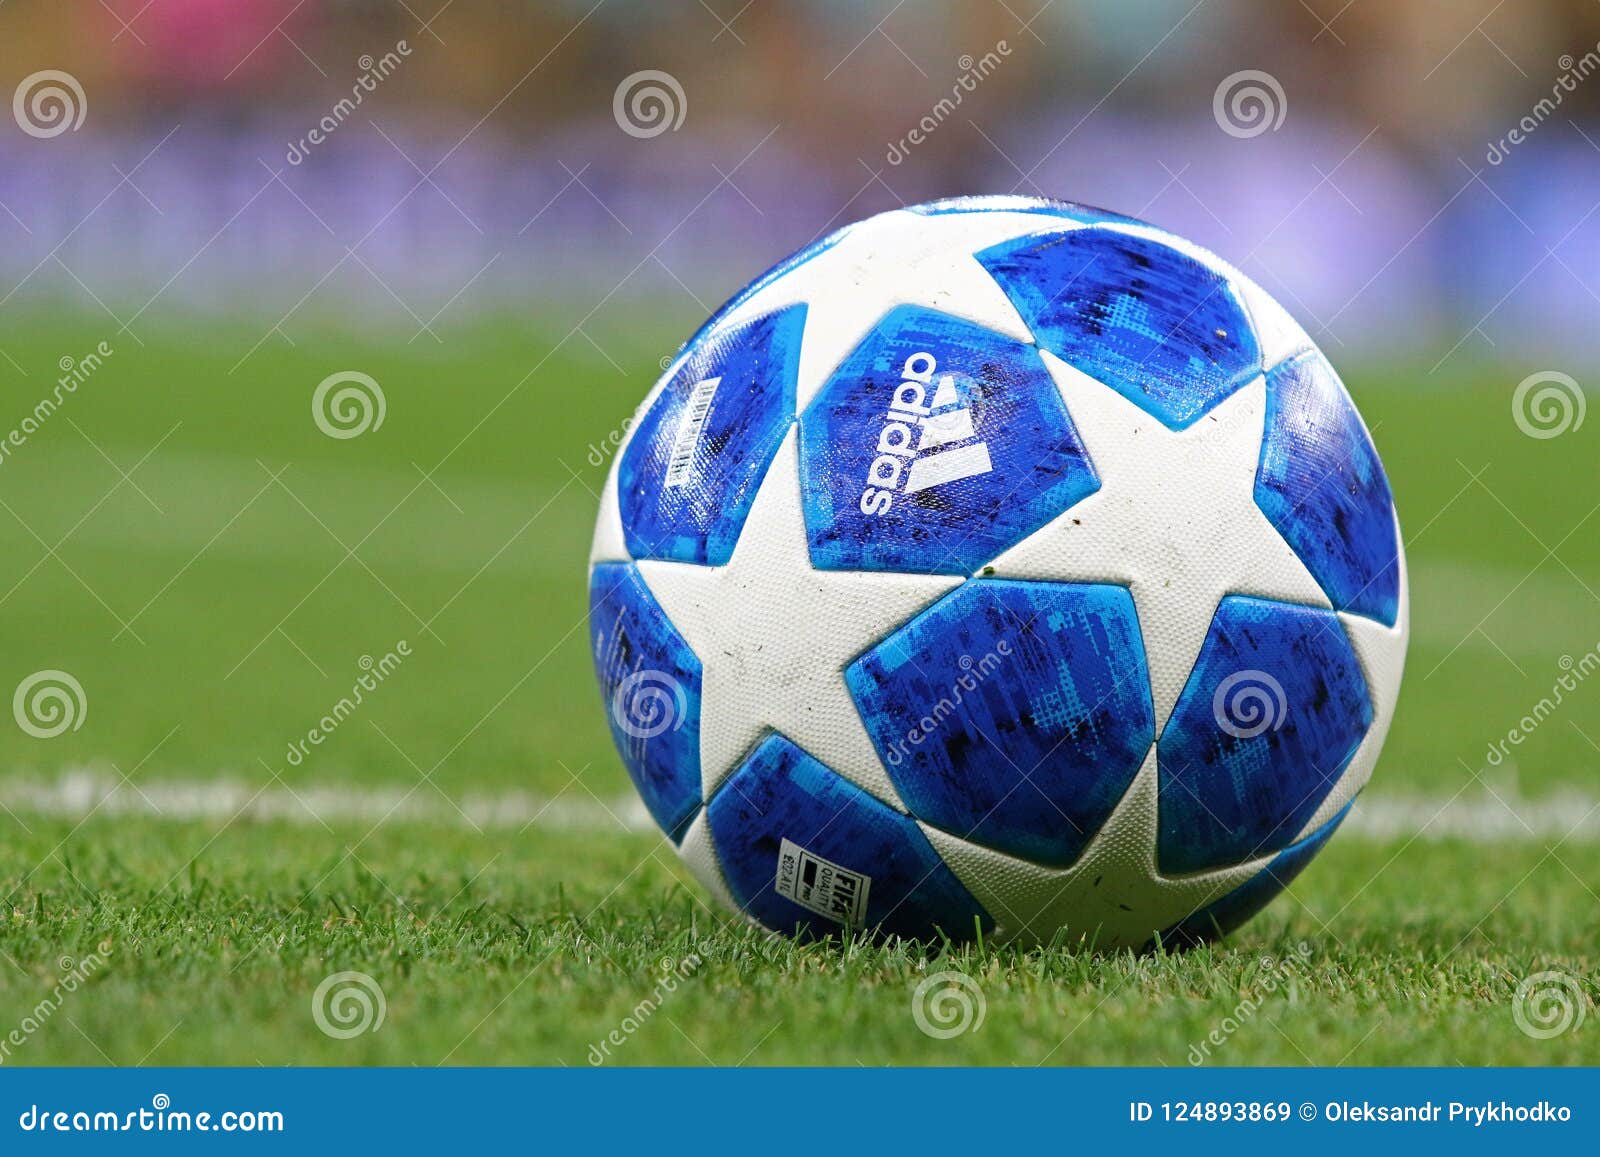 Official UEFA Champions League 2018/19 Match Balls Editorial Stock Image -  Image of matchball, blue: 124893869